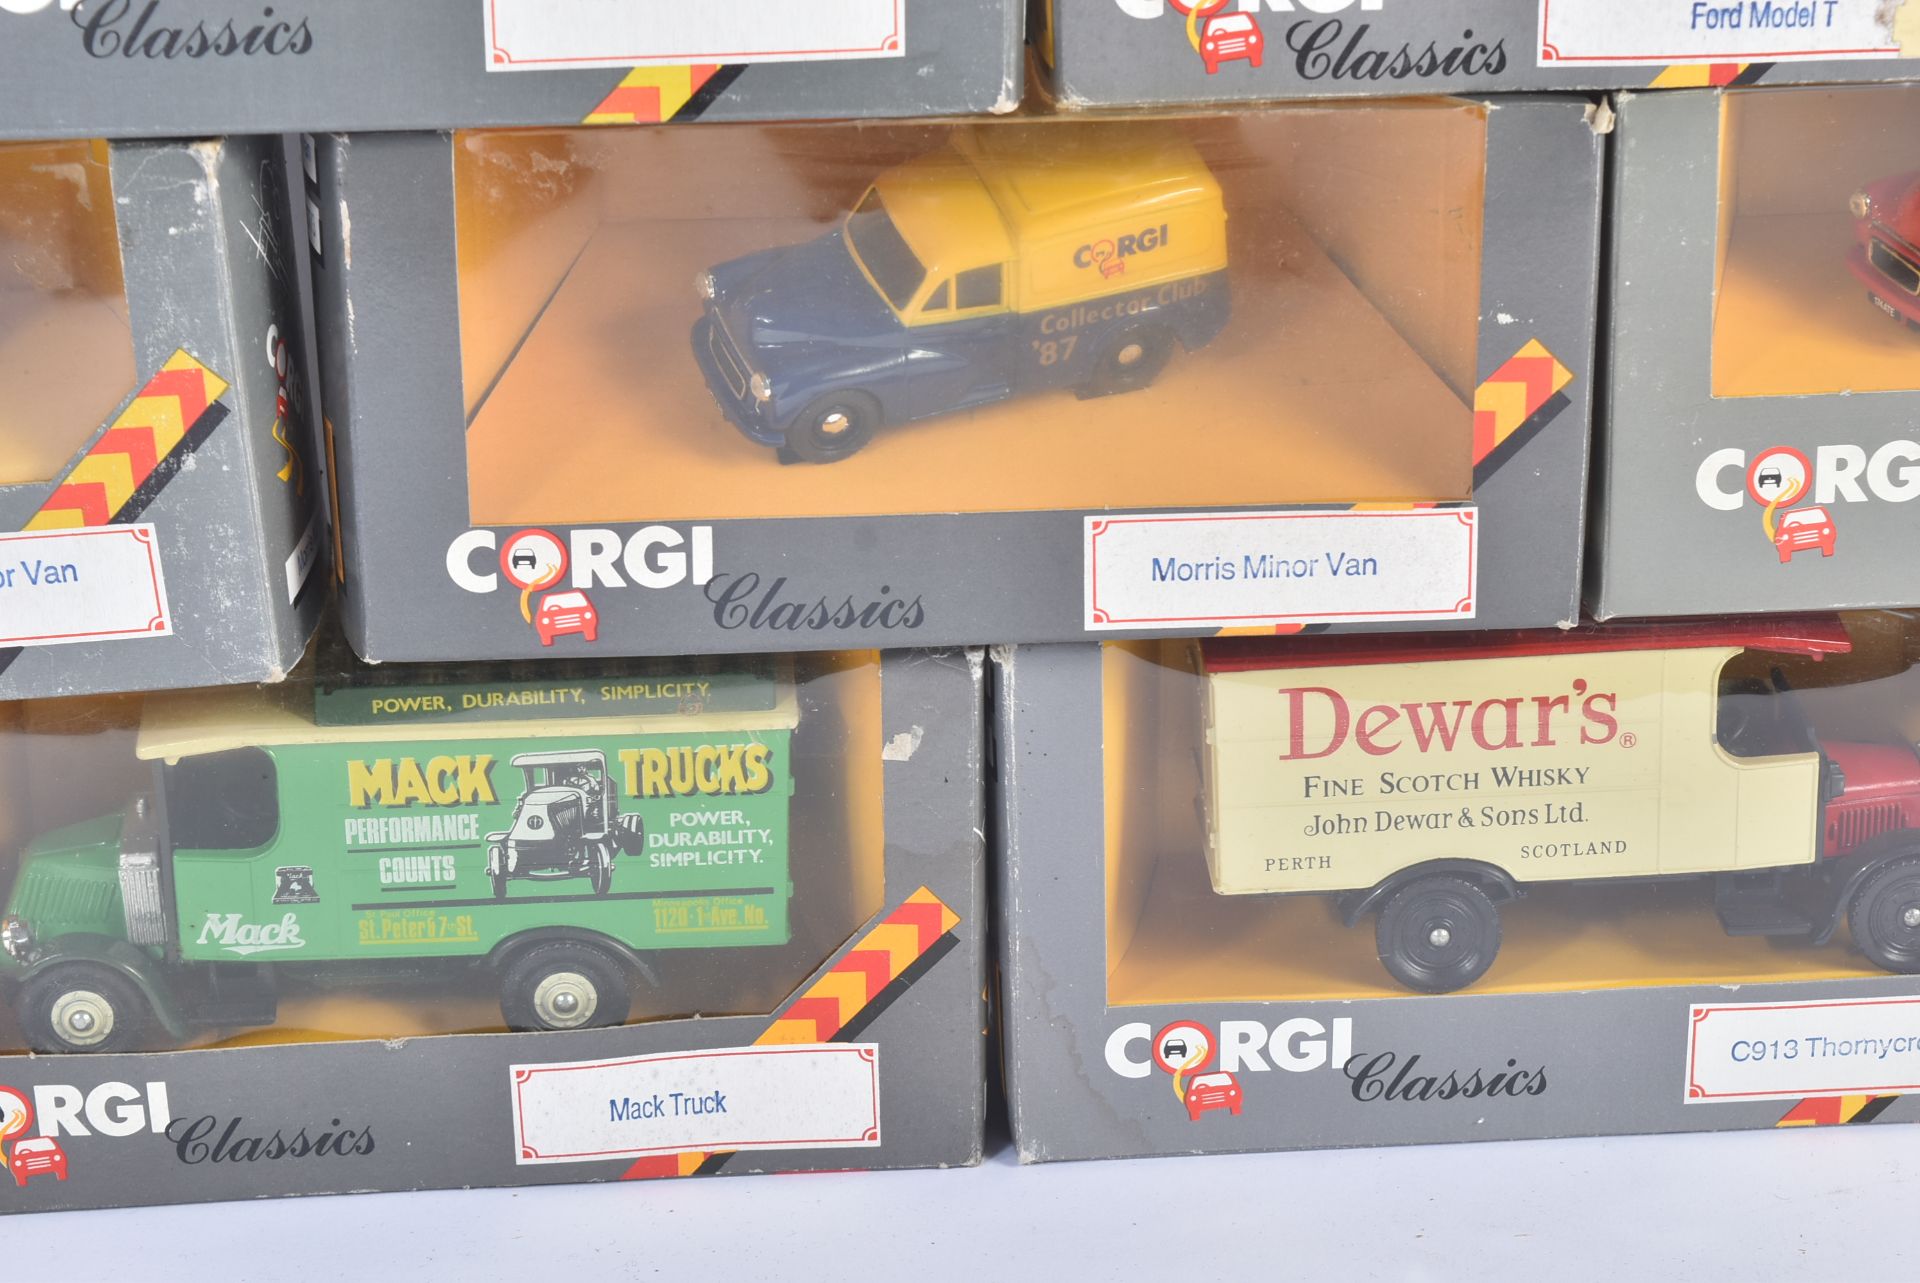 COLLECTION OF VINTAGE CORGI CLASSICS DIECAST MODELS - Image 4 of 7